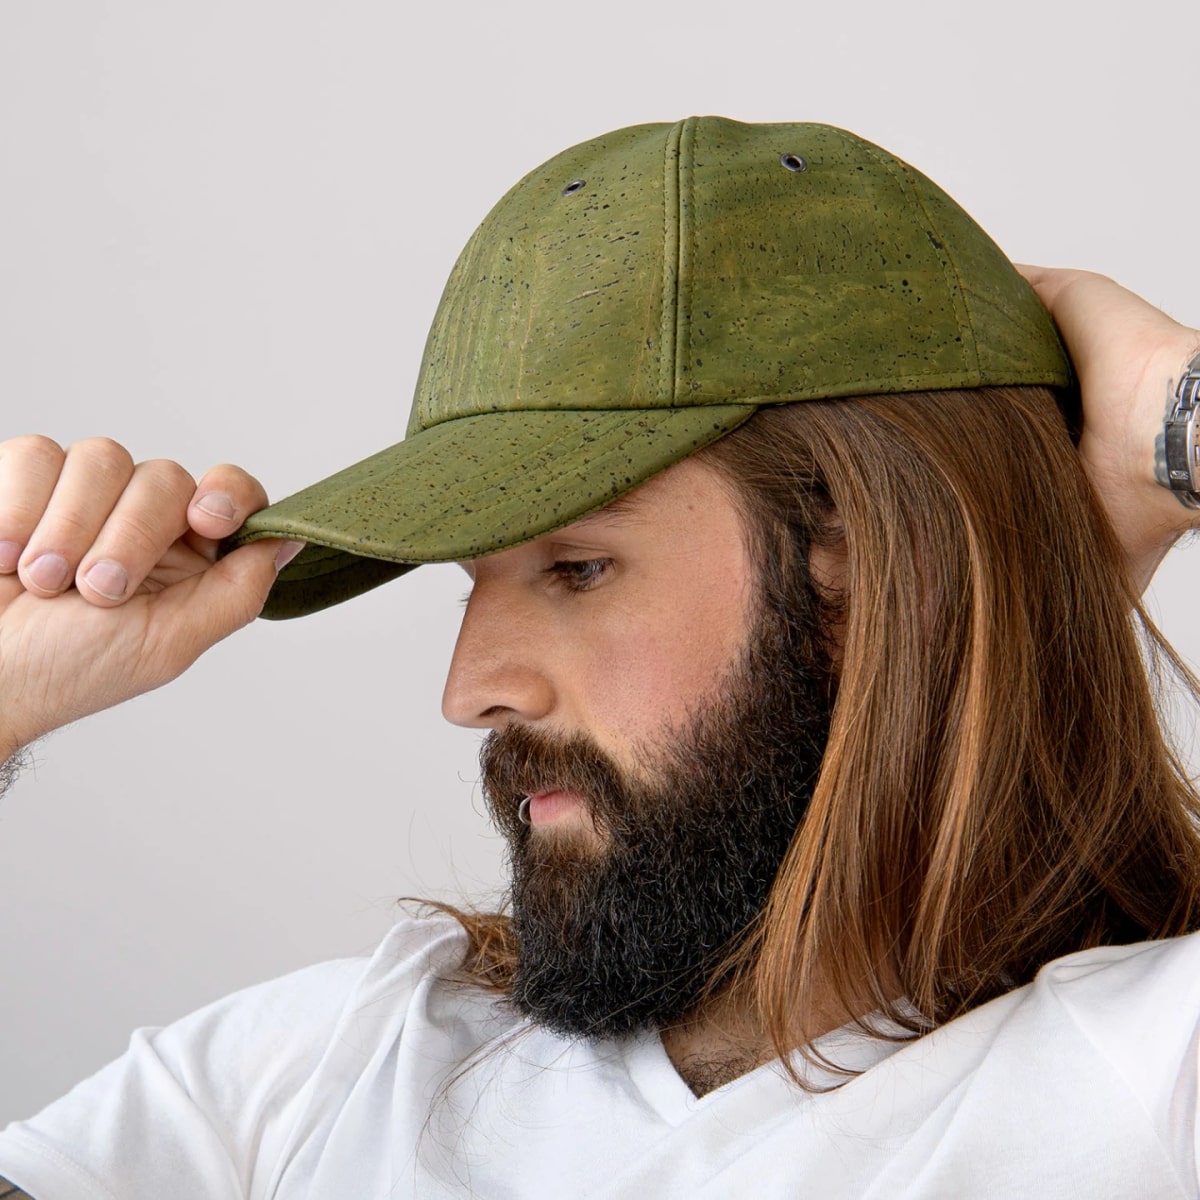 Day In Day Out Sustainable Cork Baseball Hat in green shown on bearded man